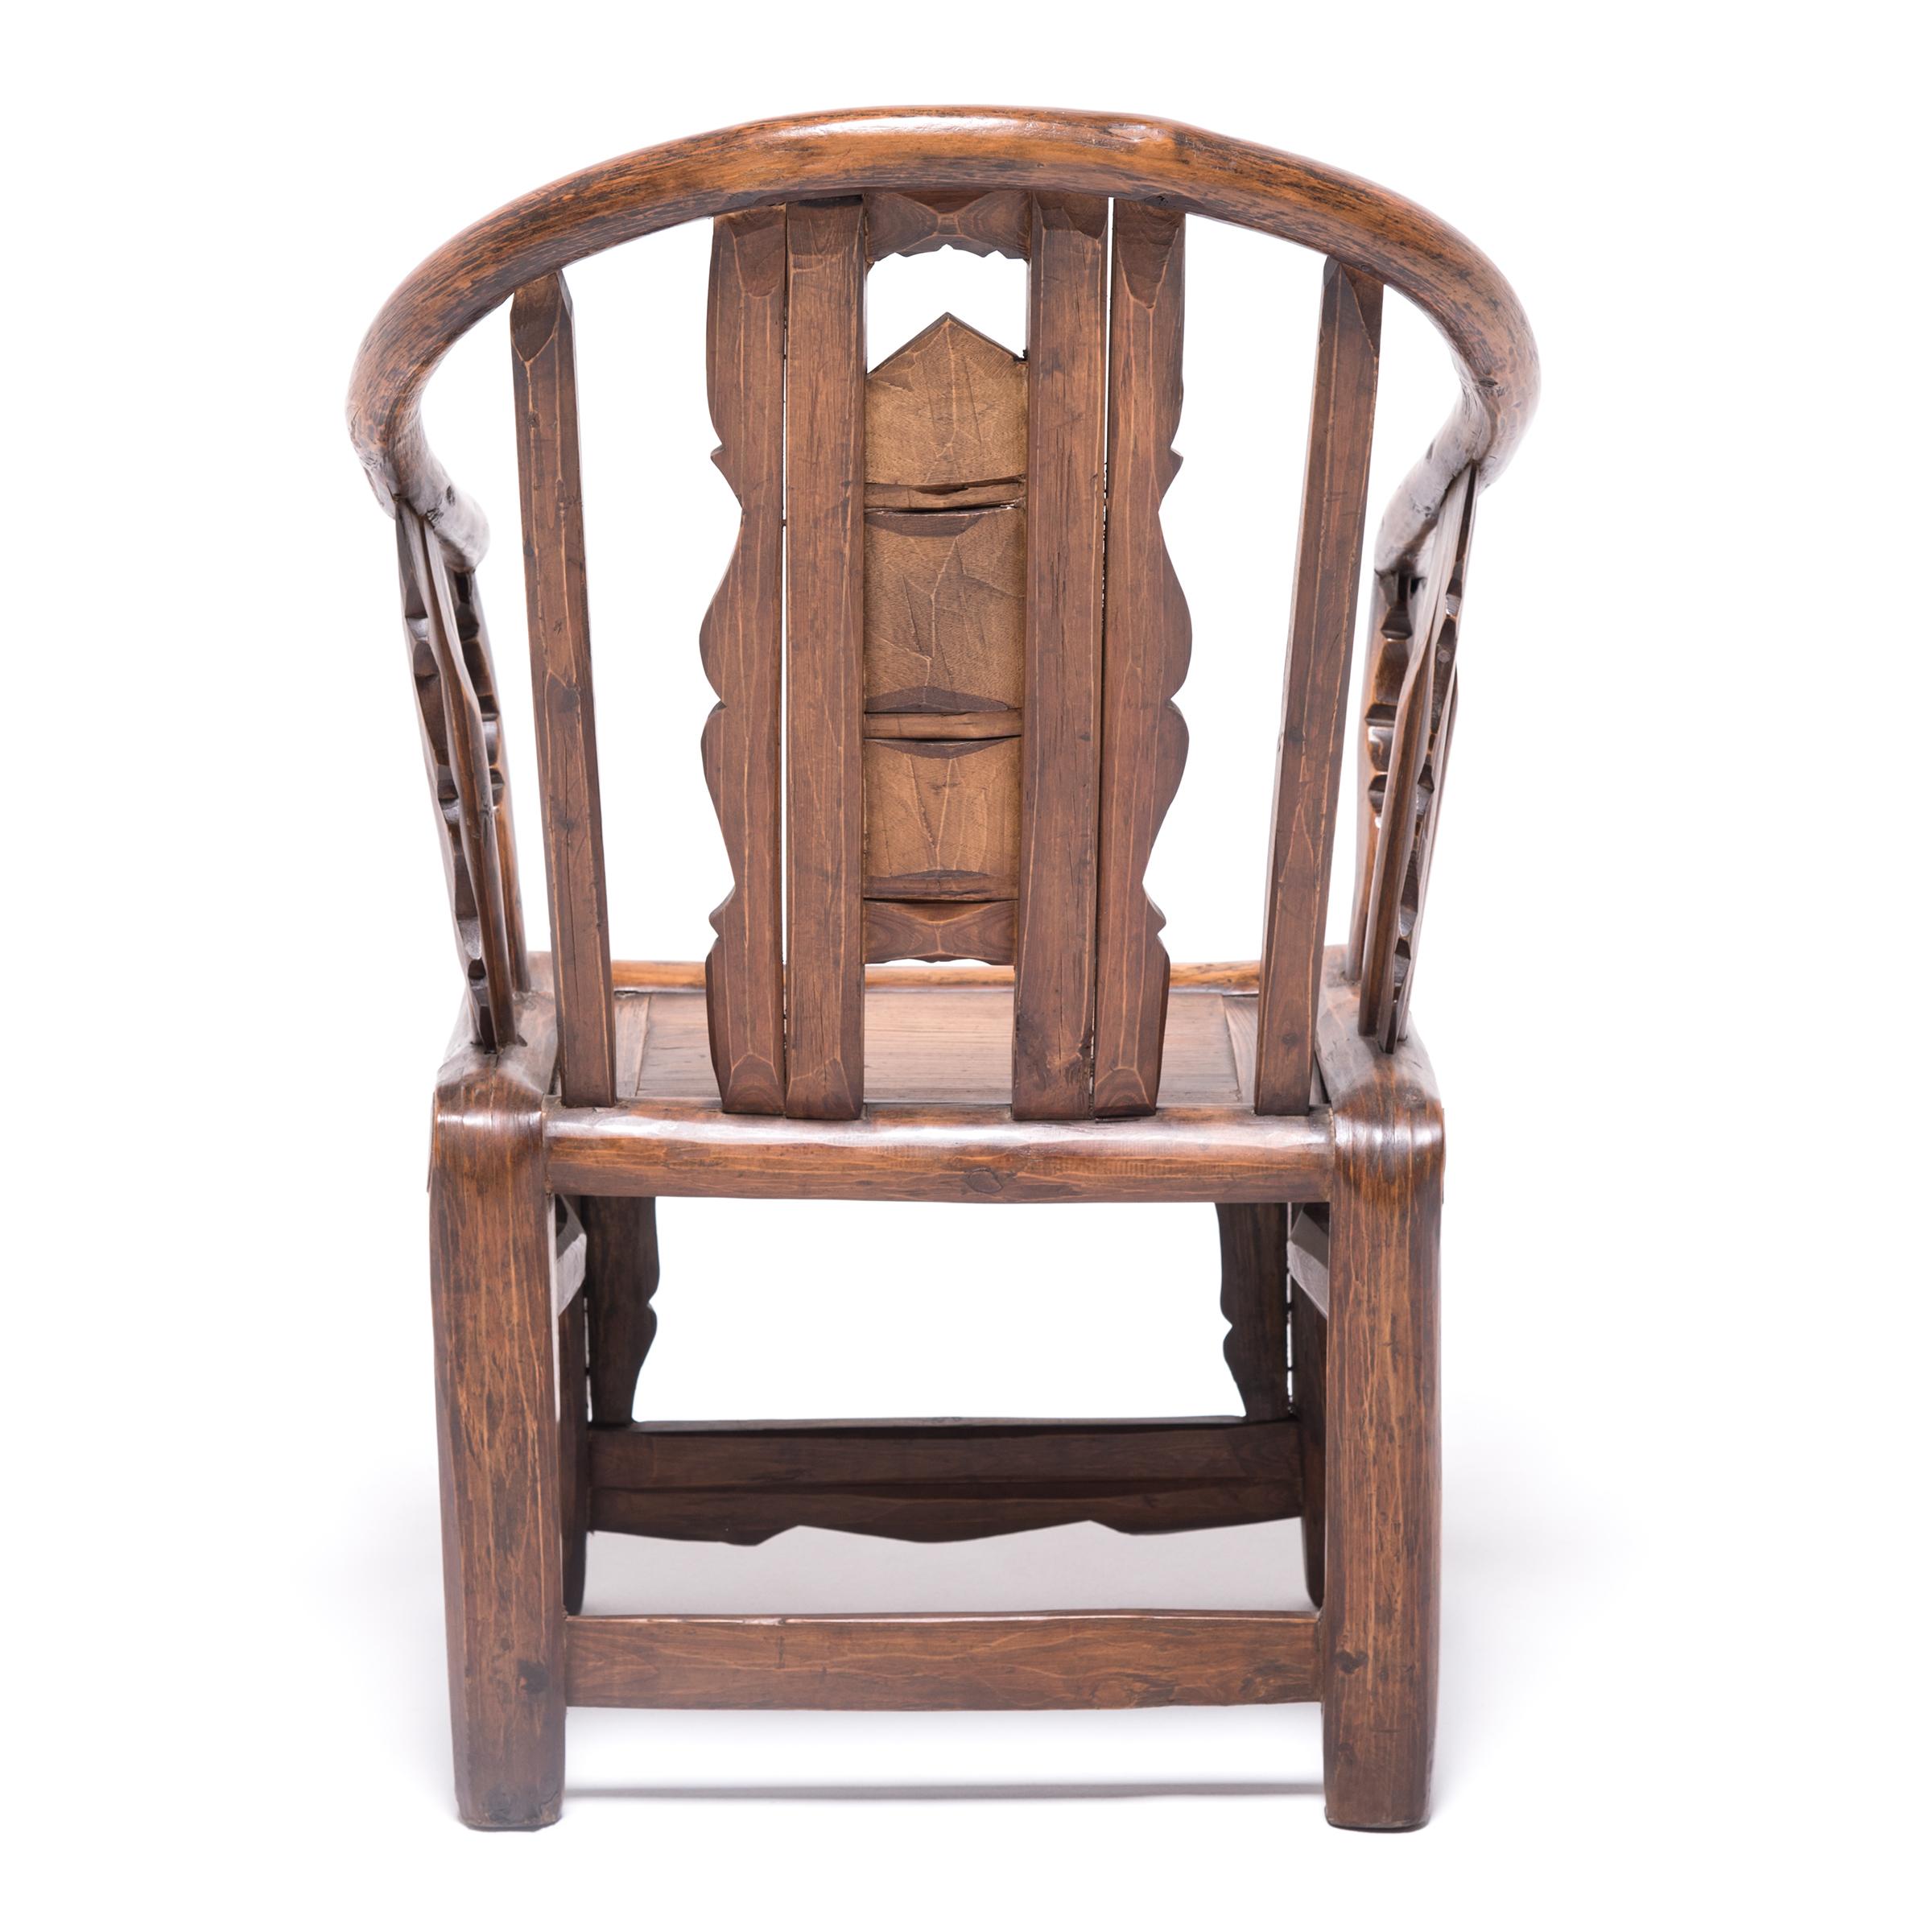 Low Chinese Bentwood Chair, c. 1850 In Good Condition For Sale In Chicago, IL